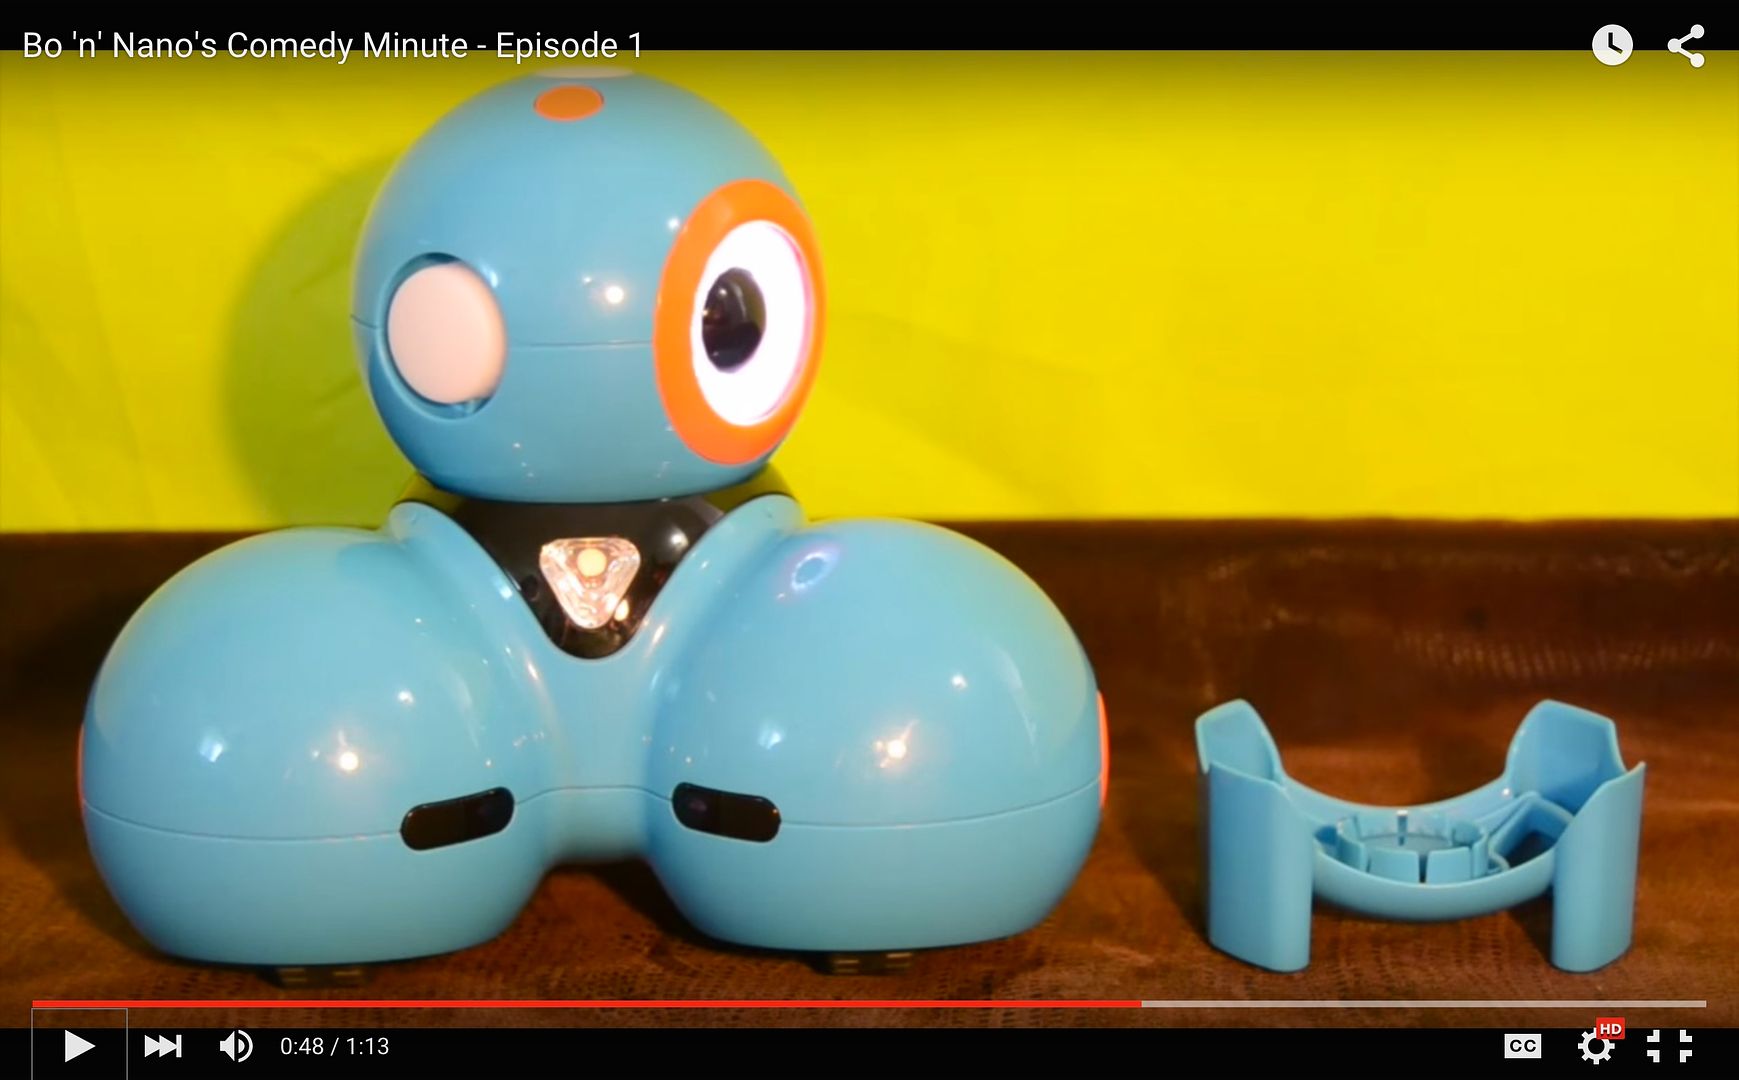 Coding projects for kids: Hand them a camera and have them create their own robot show